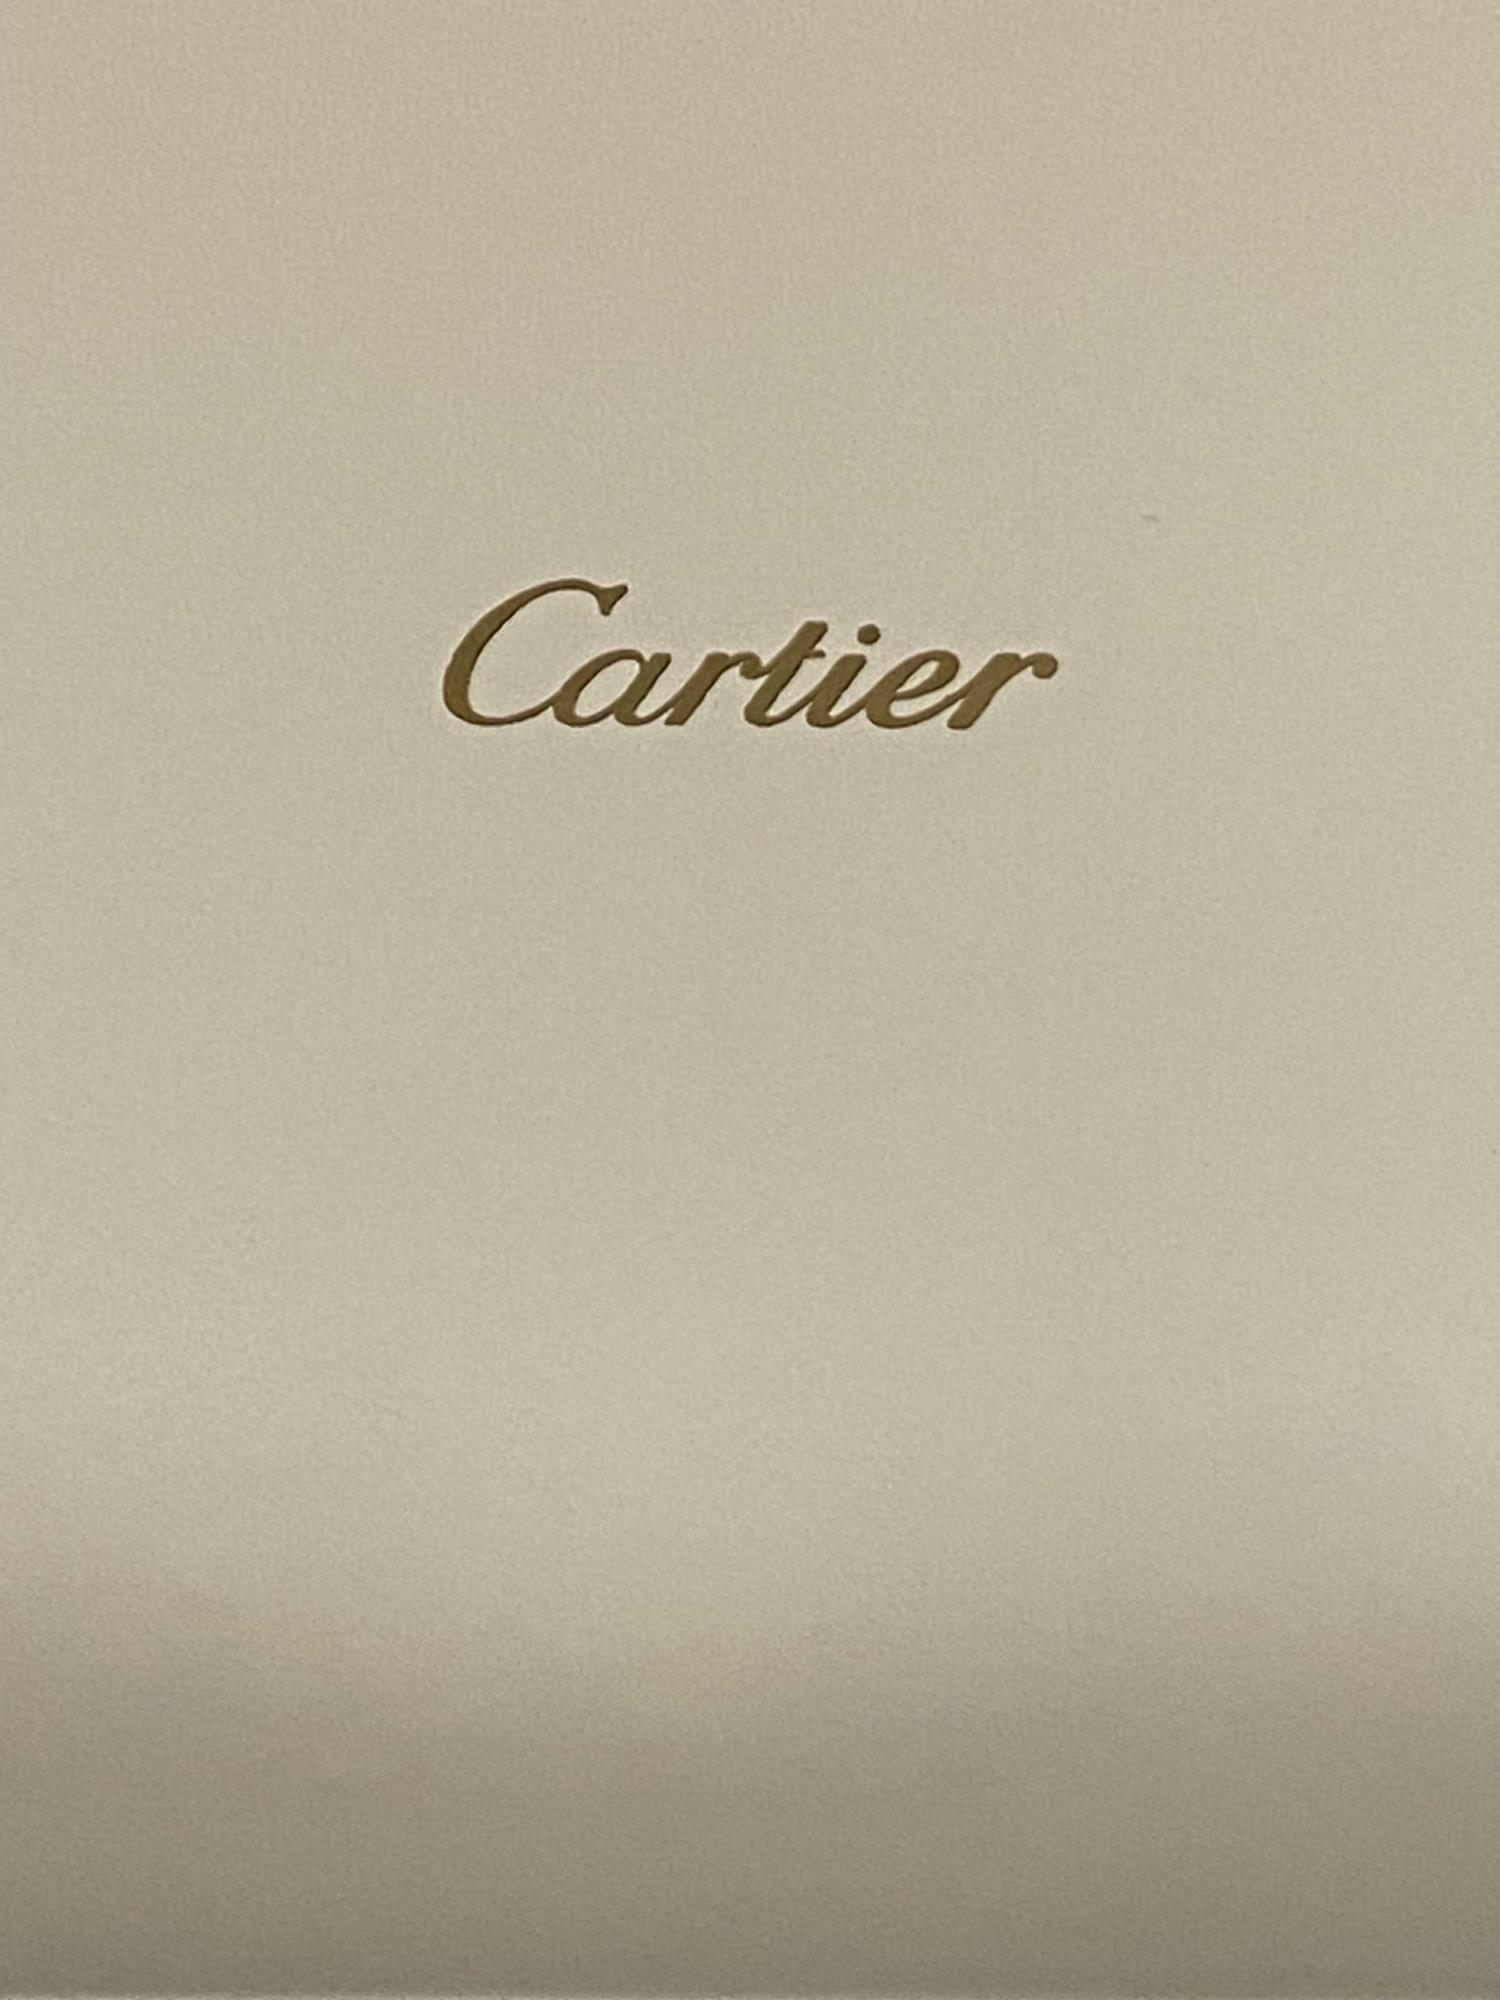 FOR CARTIER - POLISHED PEWTER PLATE